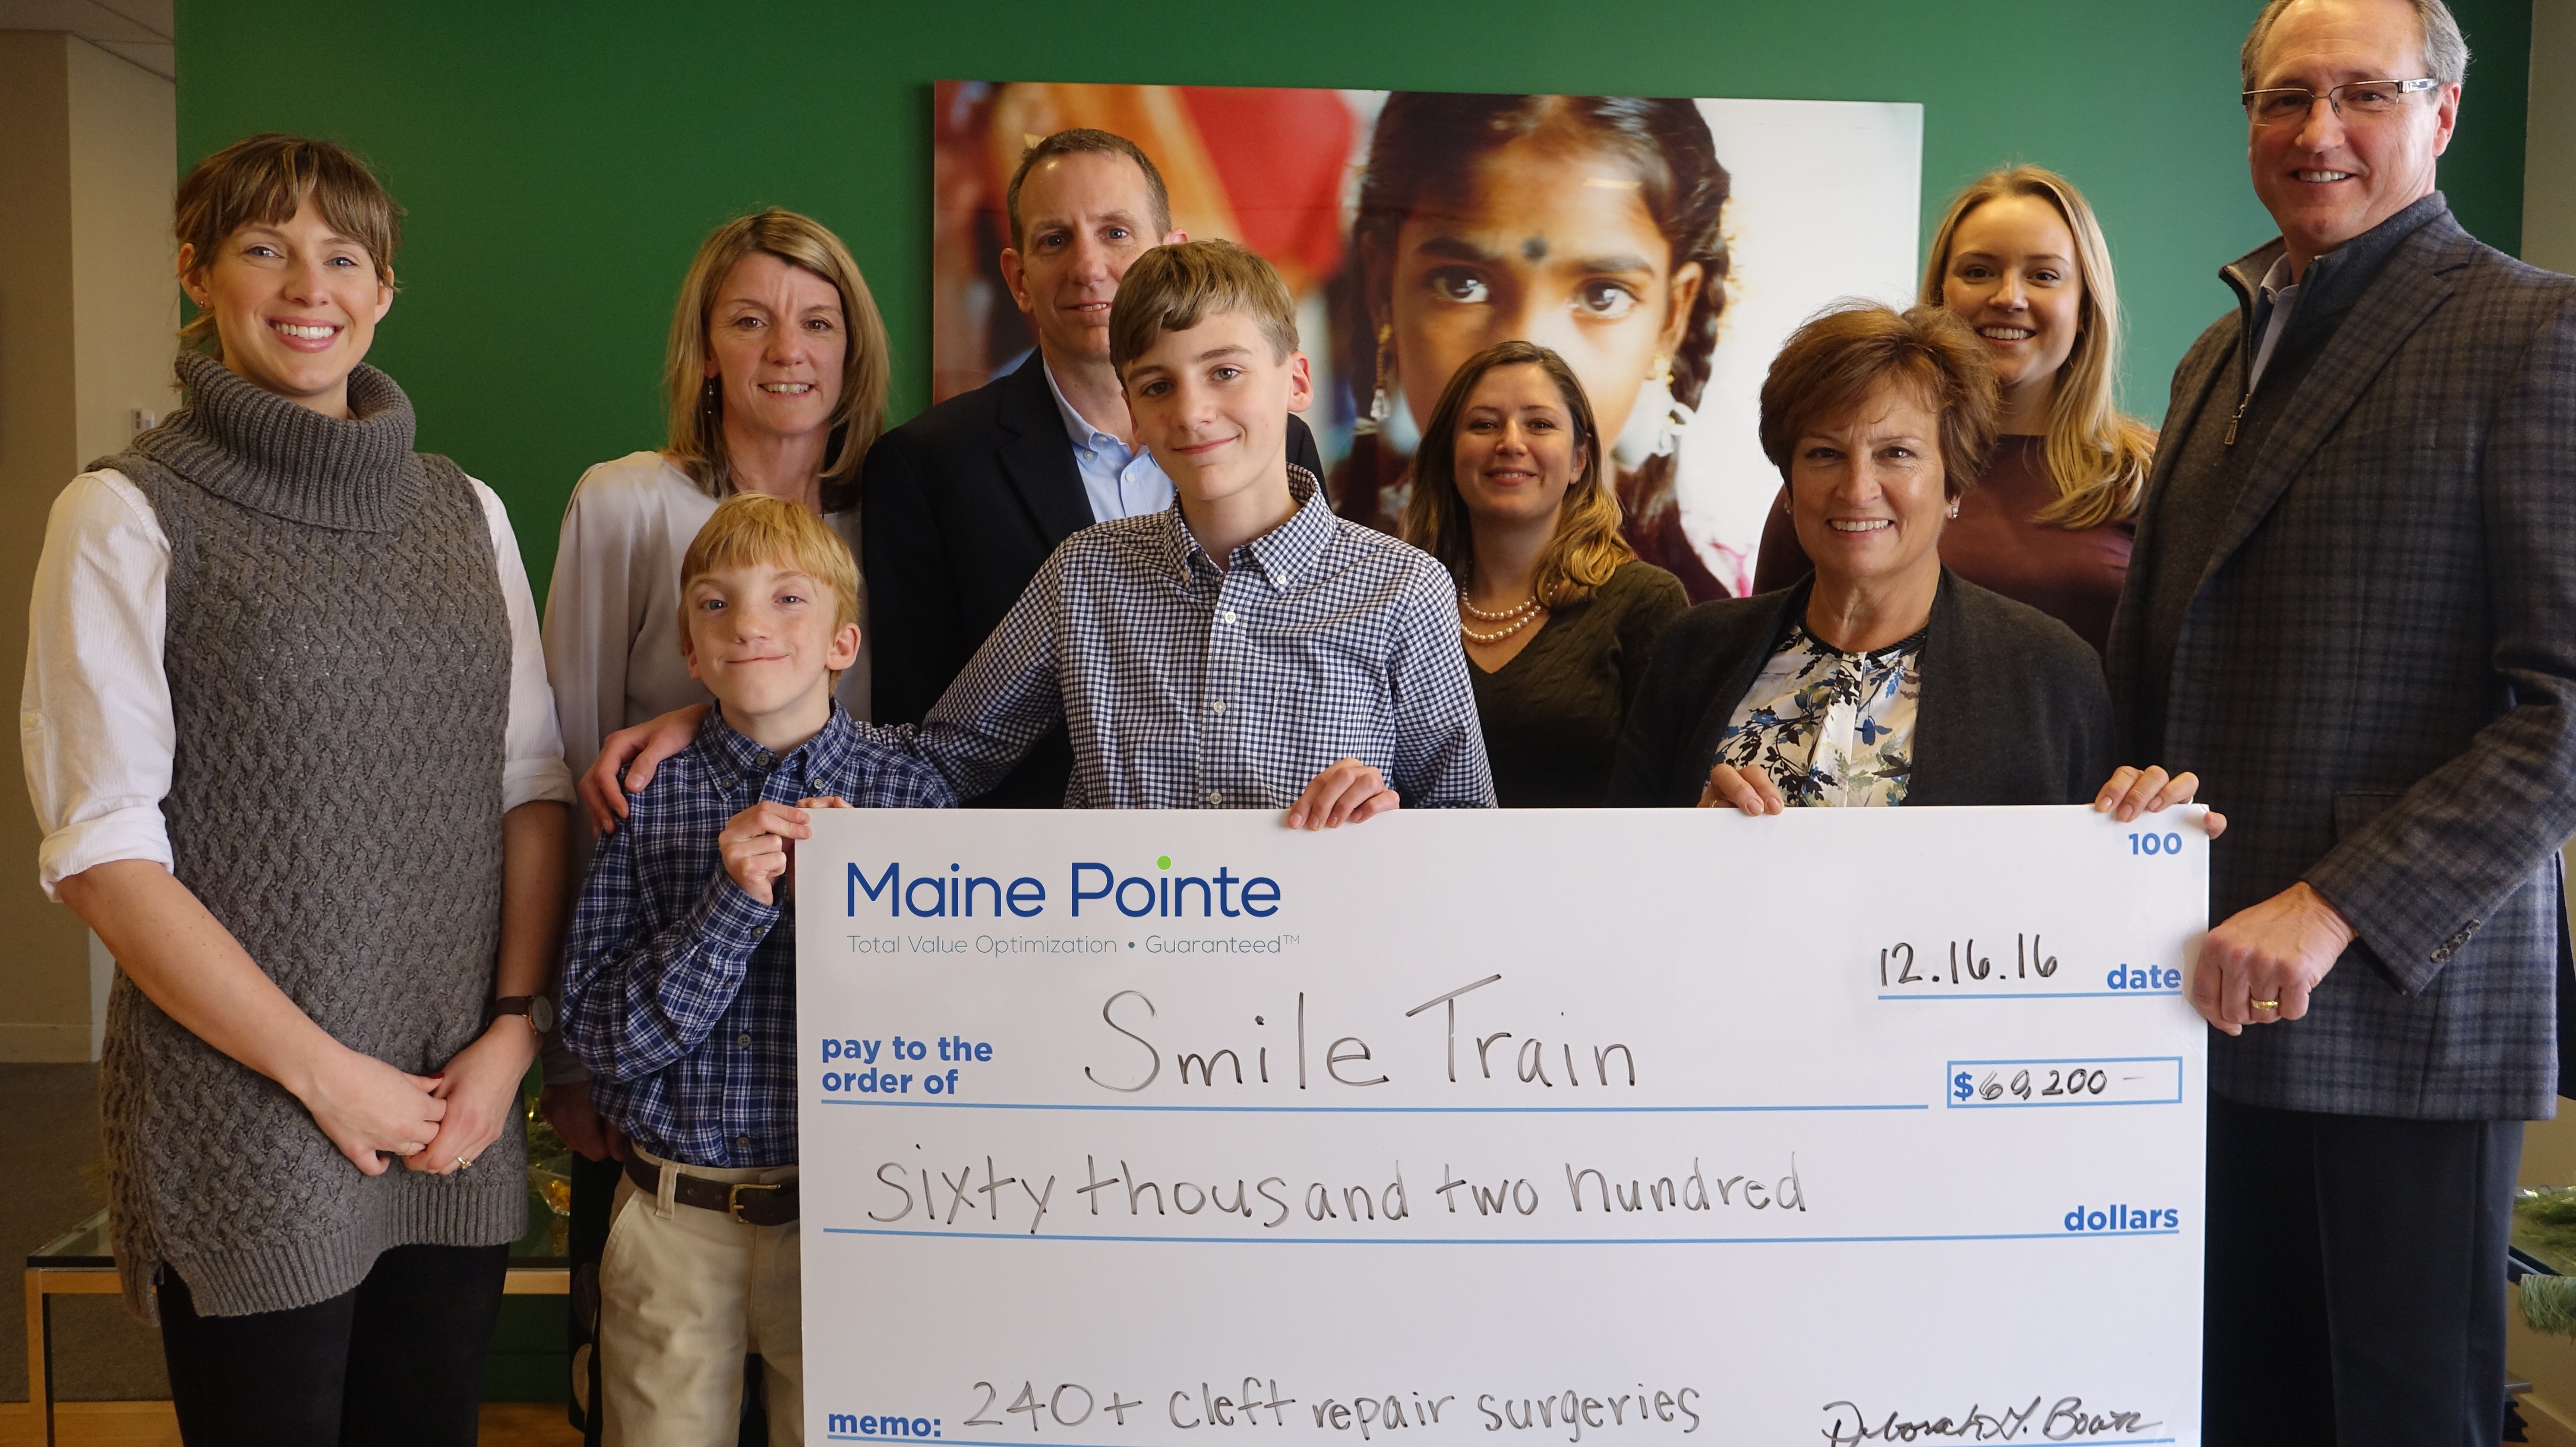 Maine Pointe supports Smile Train with $60,200 donation to help improve the health and lives of children in developing countries born with cleft lip and/or cleft palate